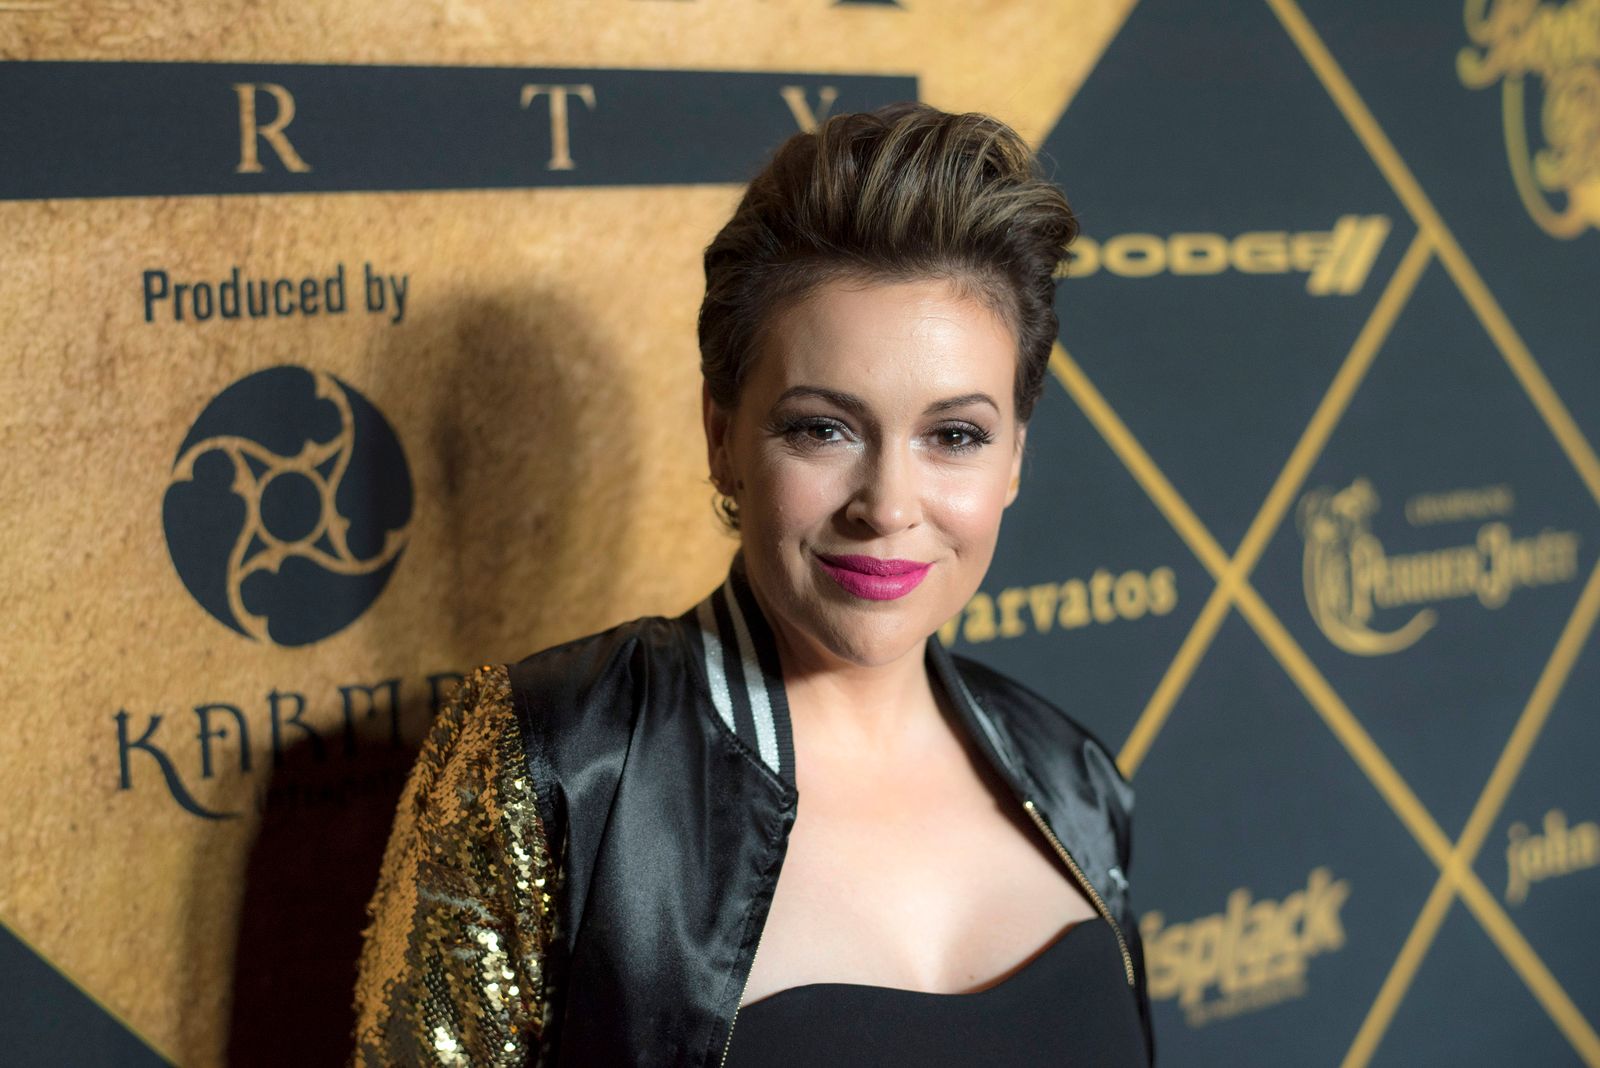 L'actrice Alyssa Milano | Photo : Getty Images